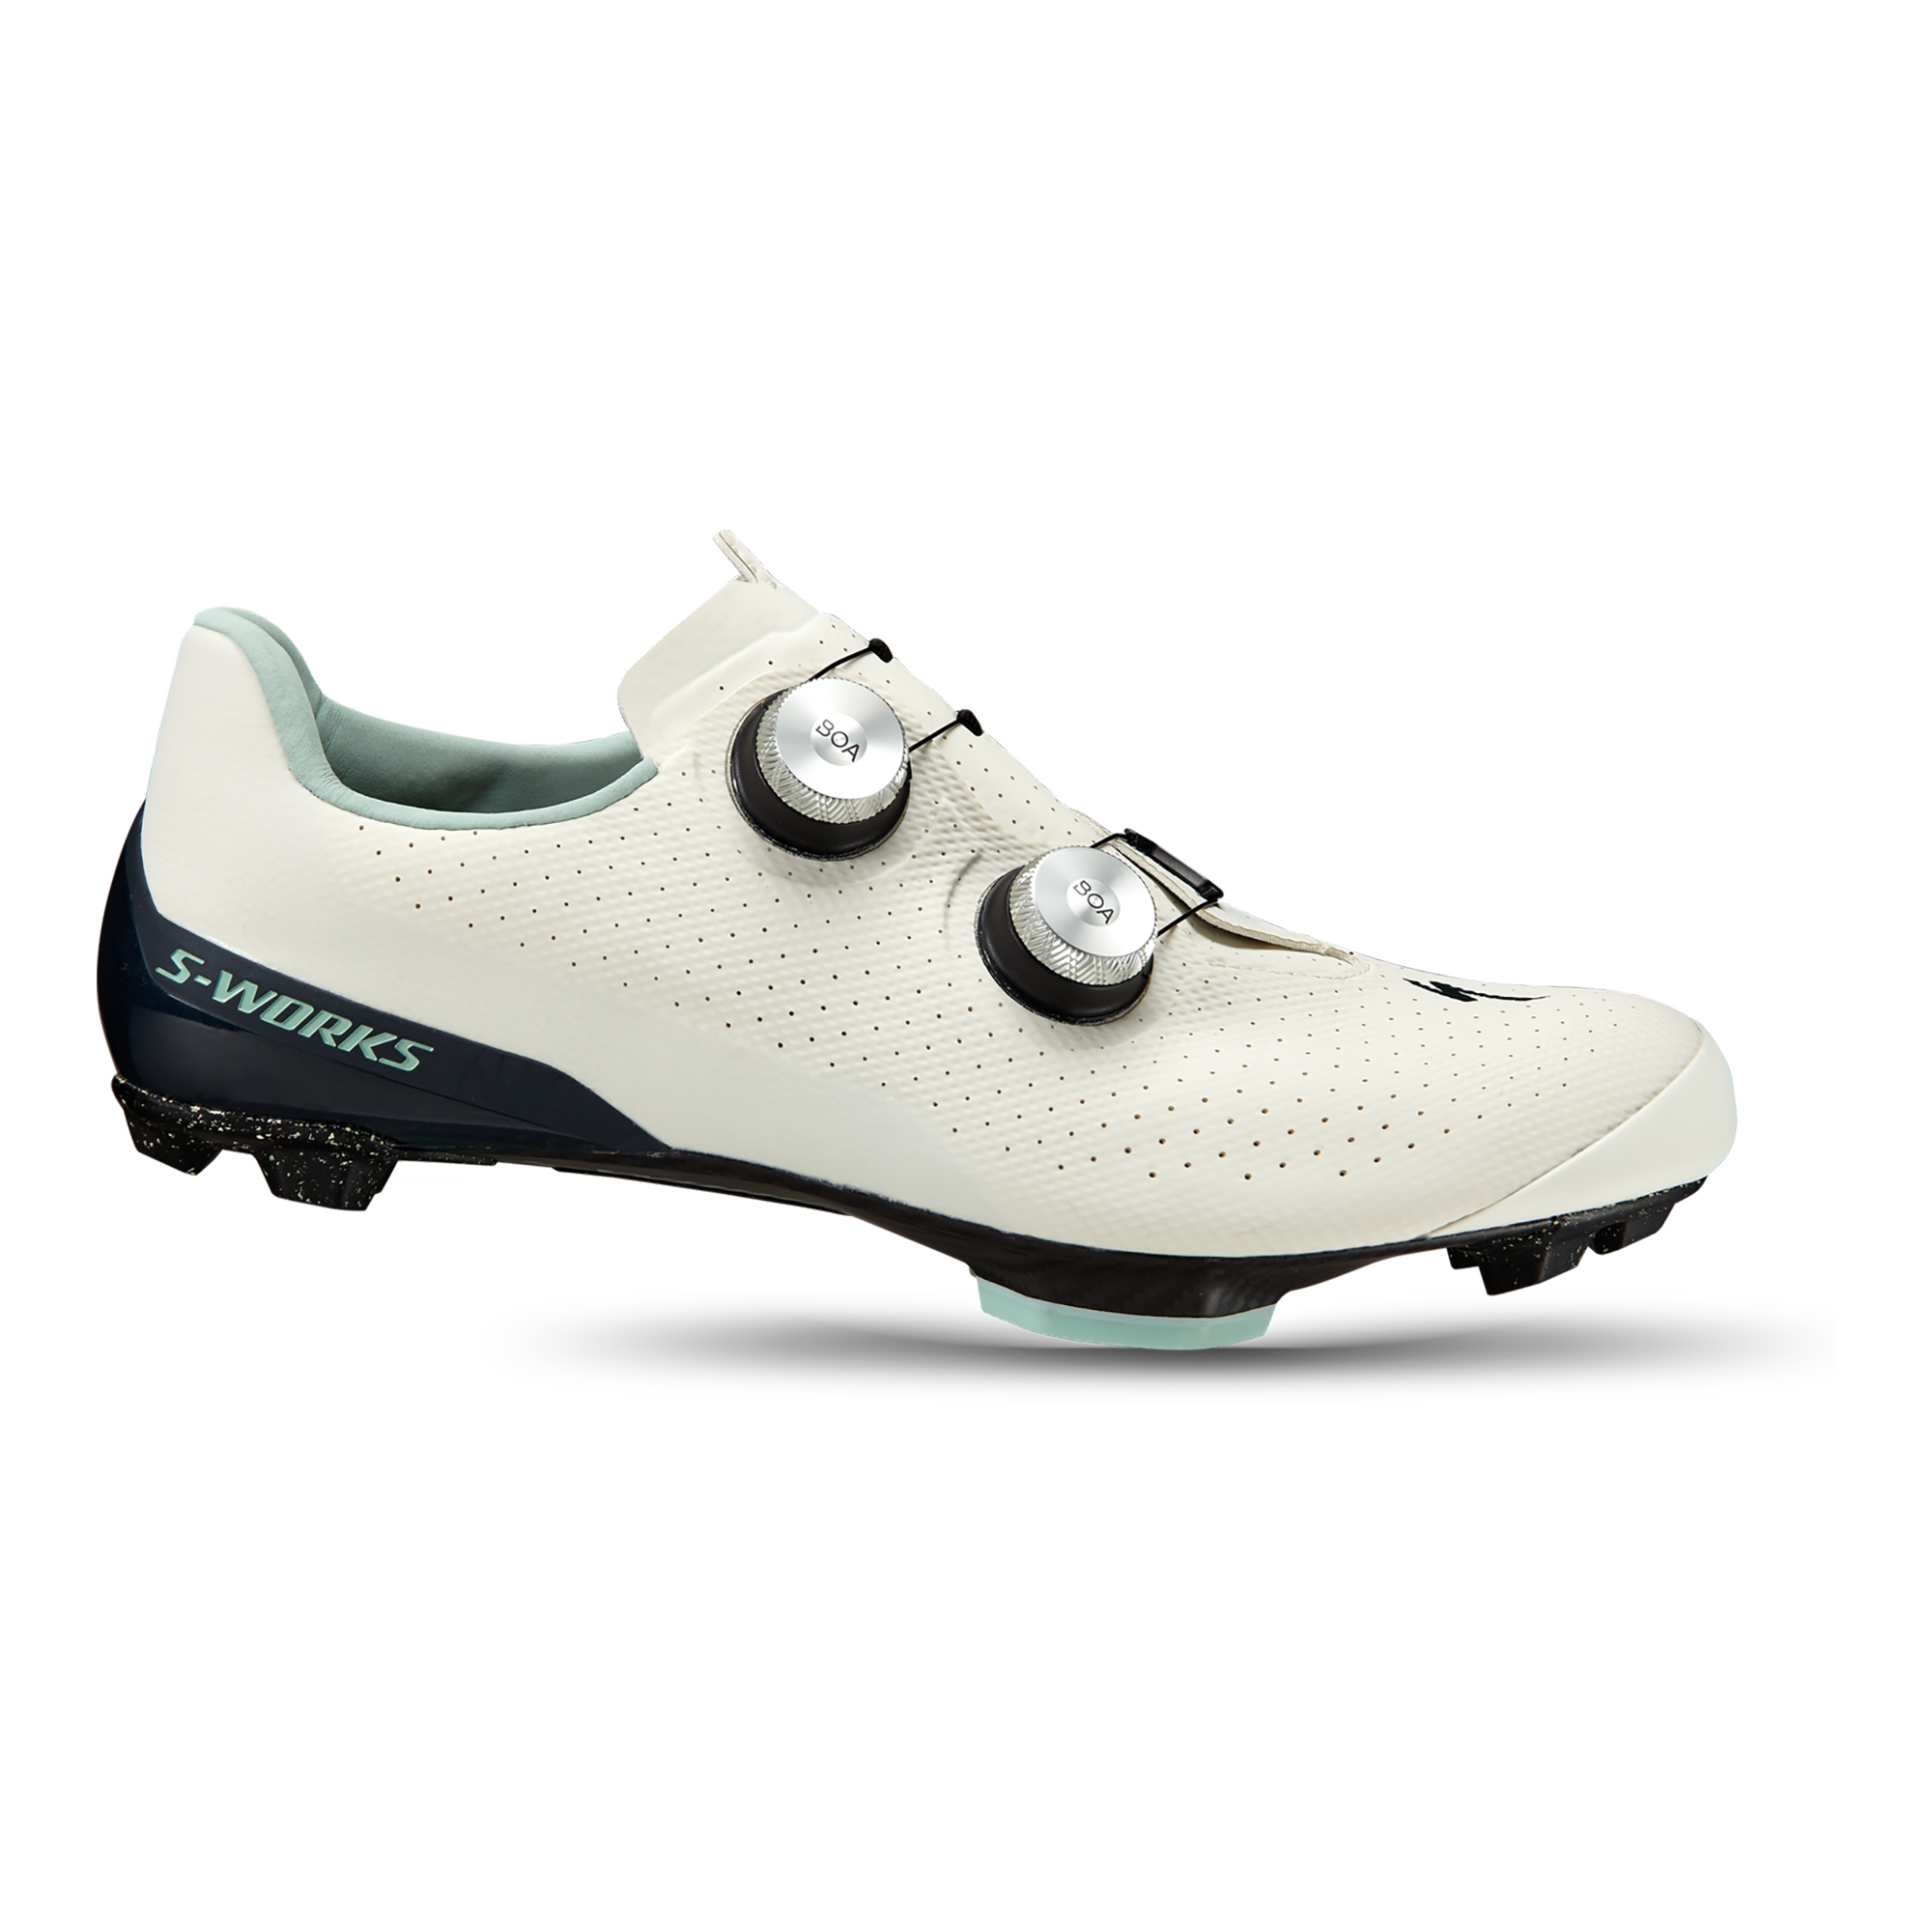 Specialized Women's Sonoma Shoes - Montgomery Cyclery